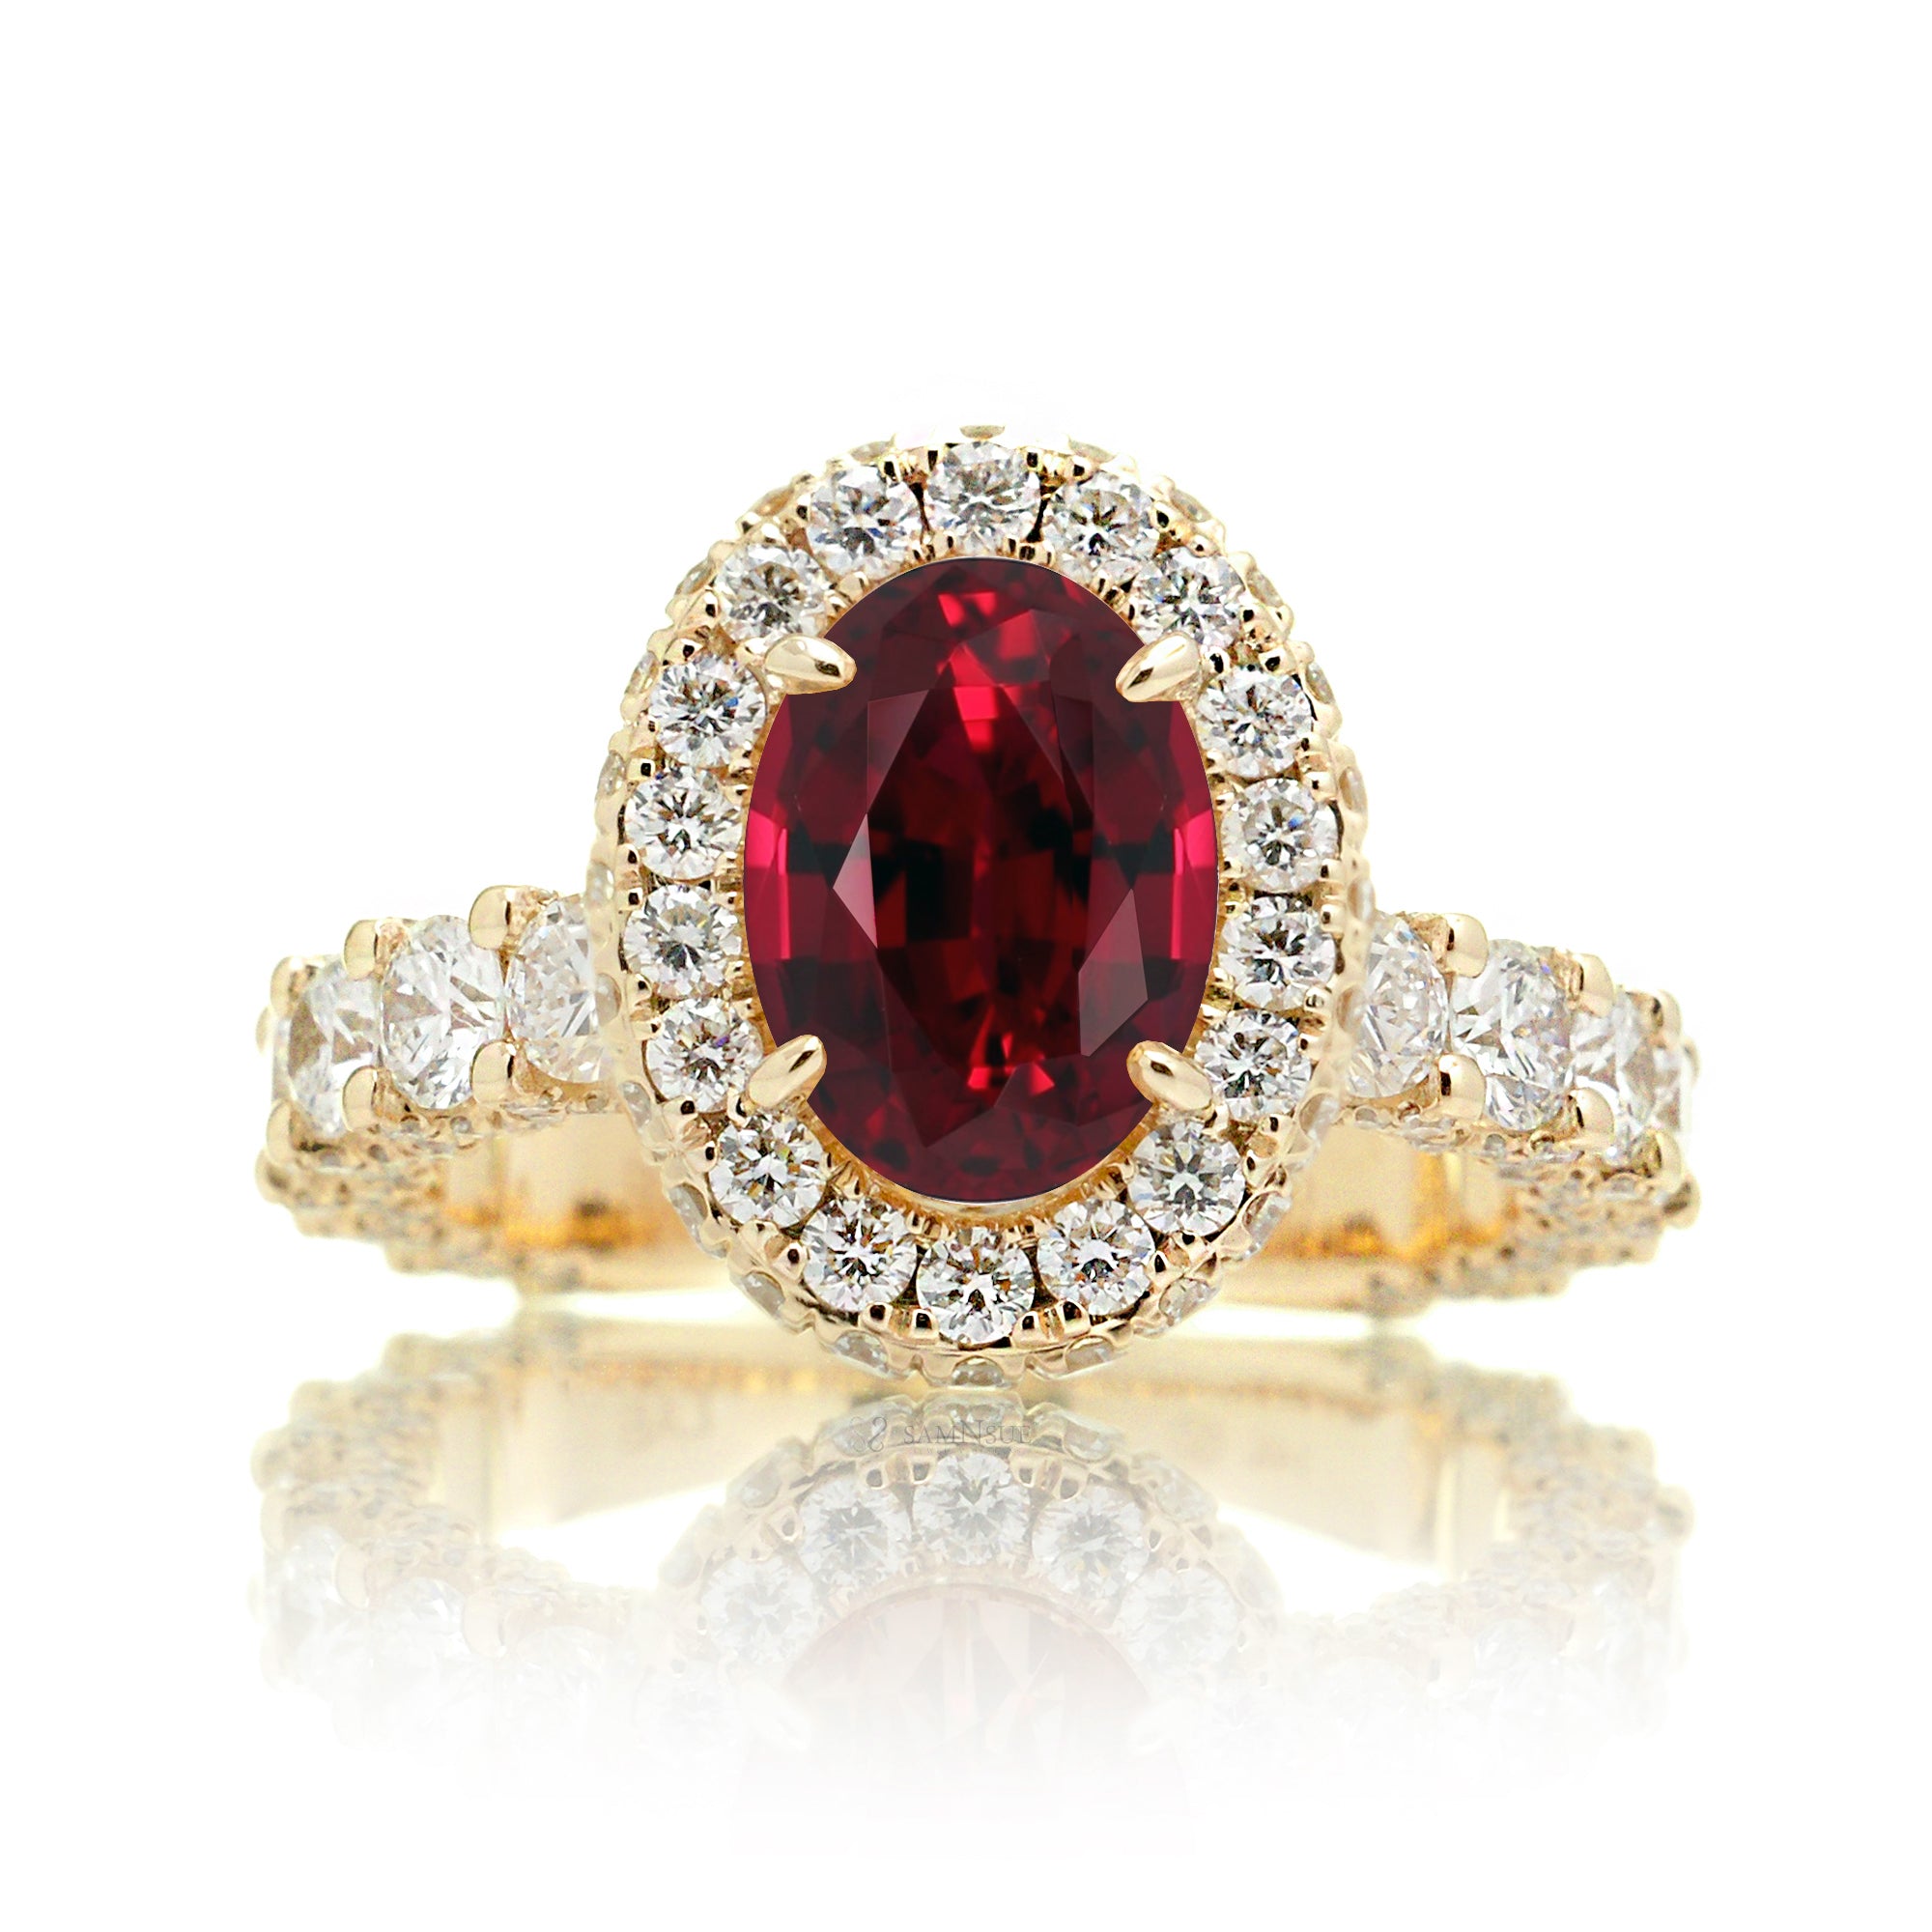 1.83 Carat Oval Ruby and Dainty Diamond Ring in 14K White Gold